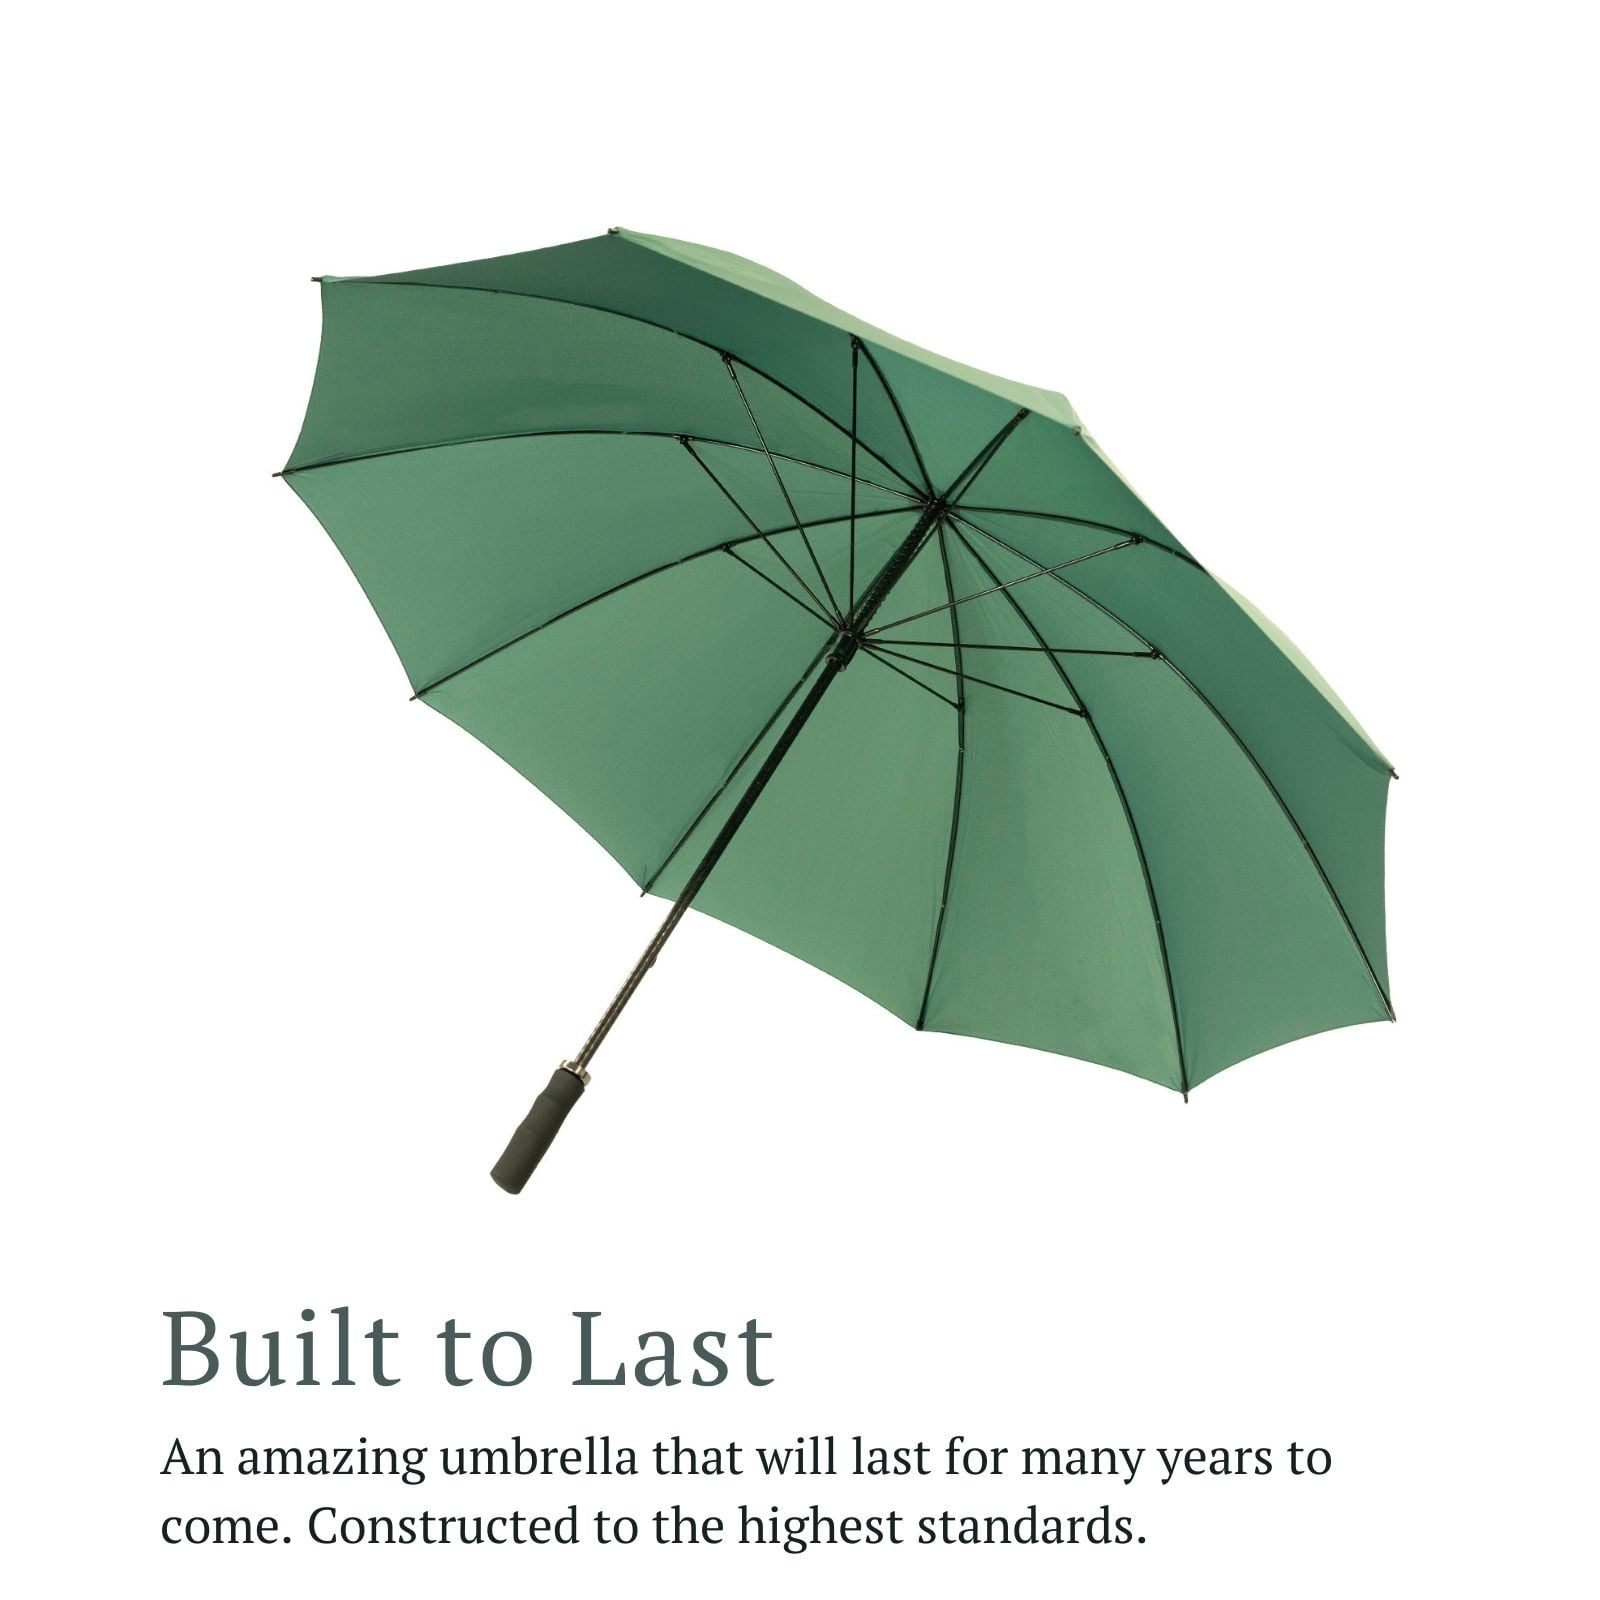 StormStar Windproof Green Golf Umbrella infographic about the quality